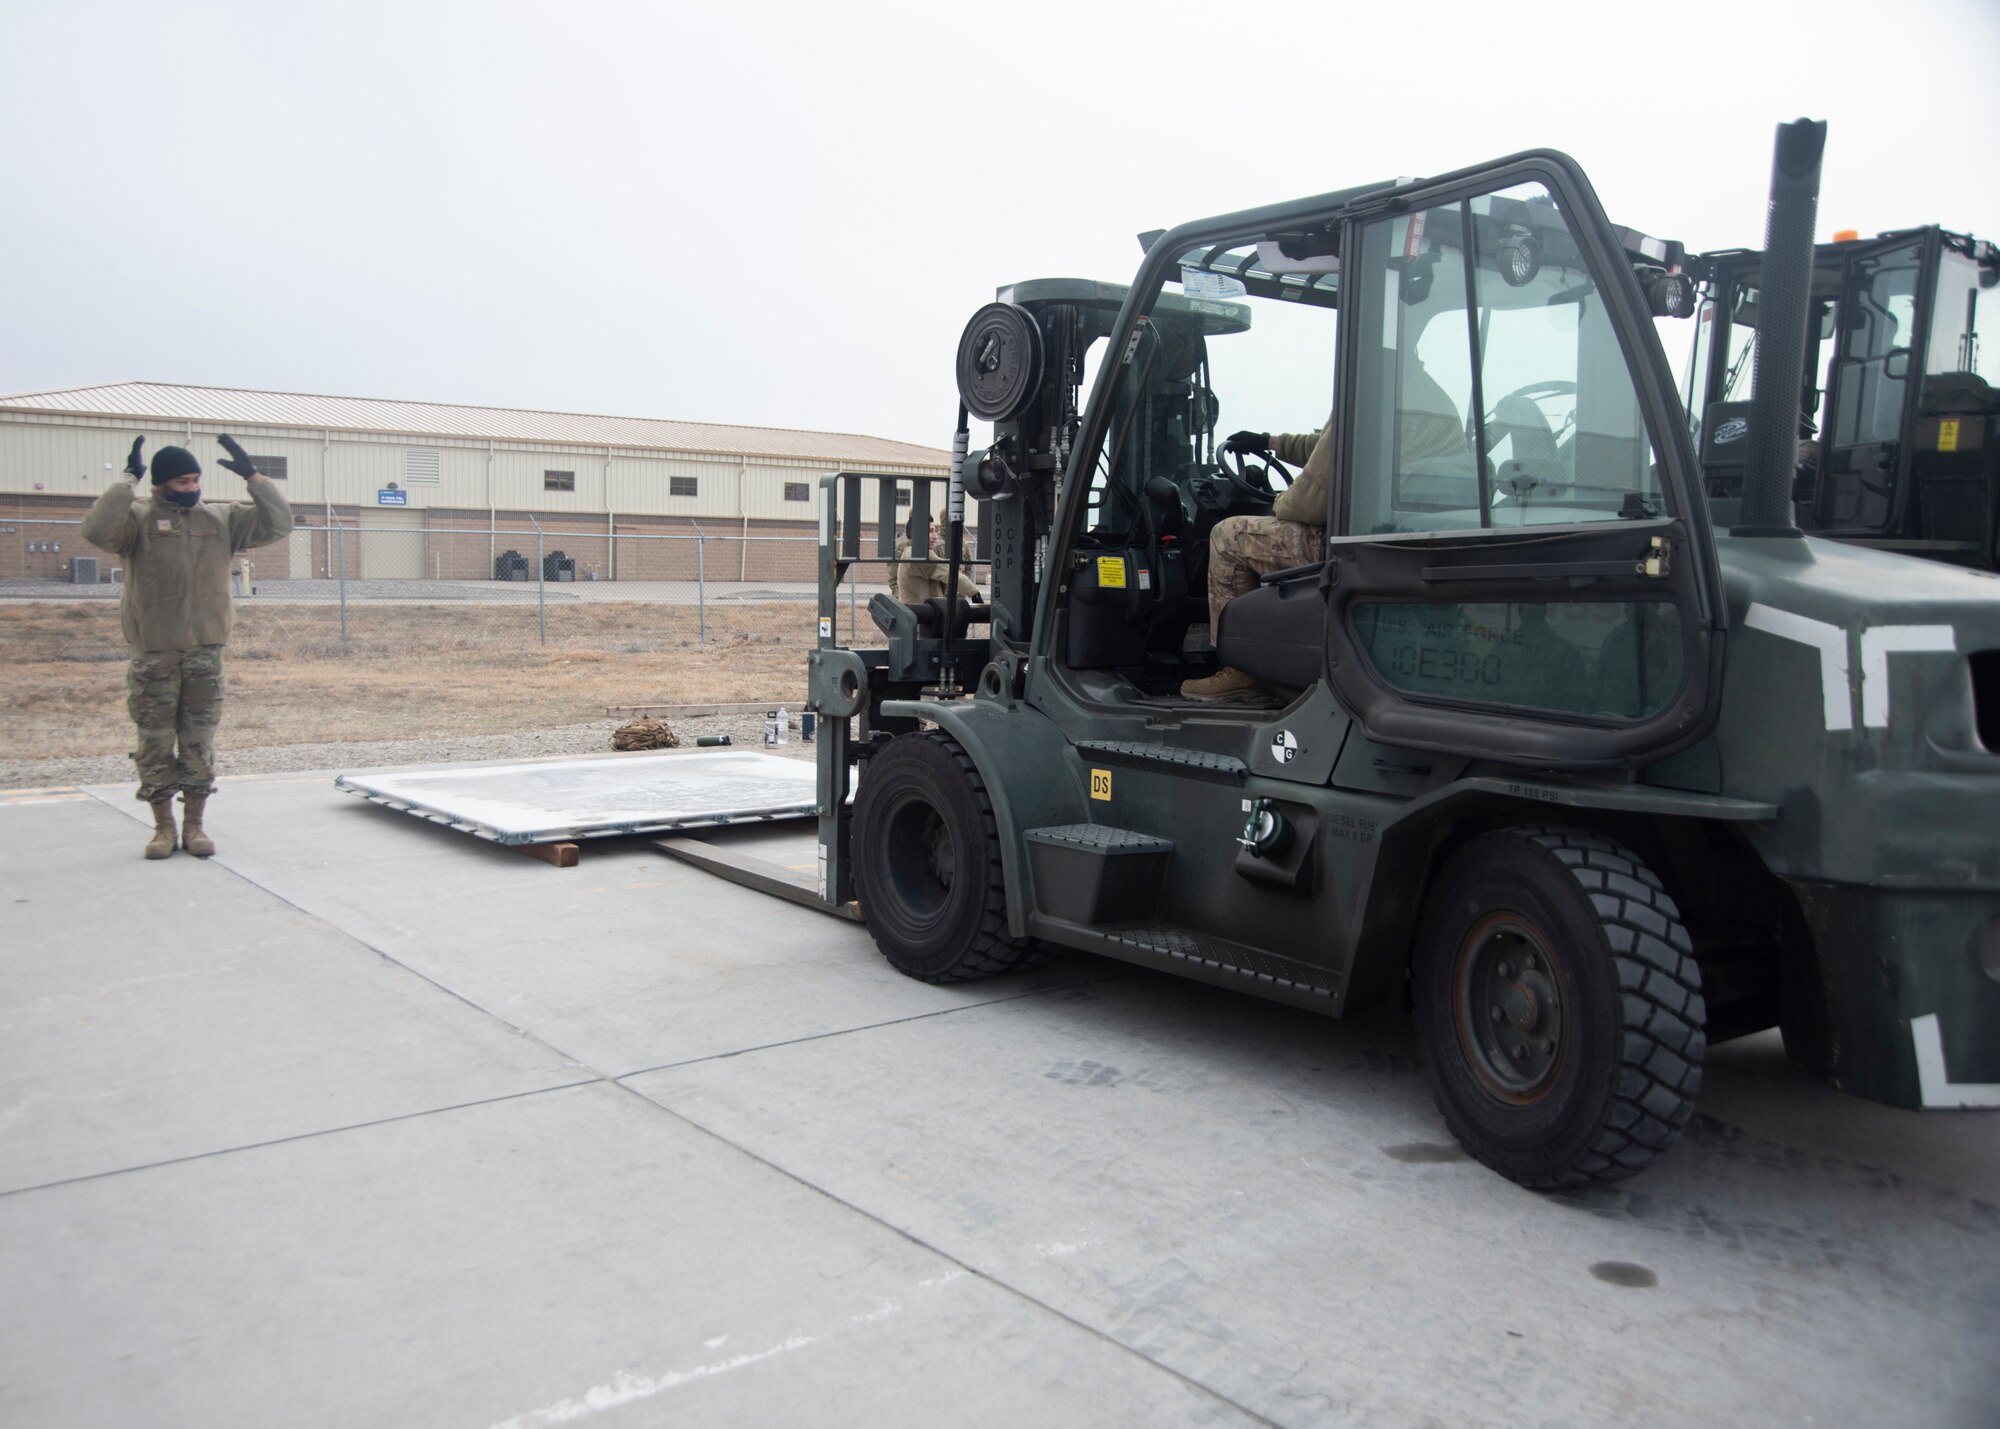 An Airman directs another Airmen who is driving a forklift.